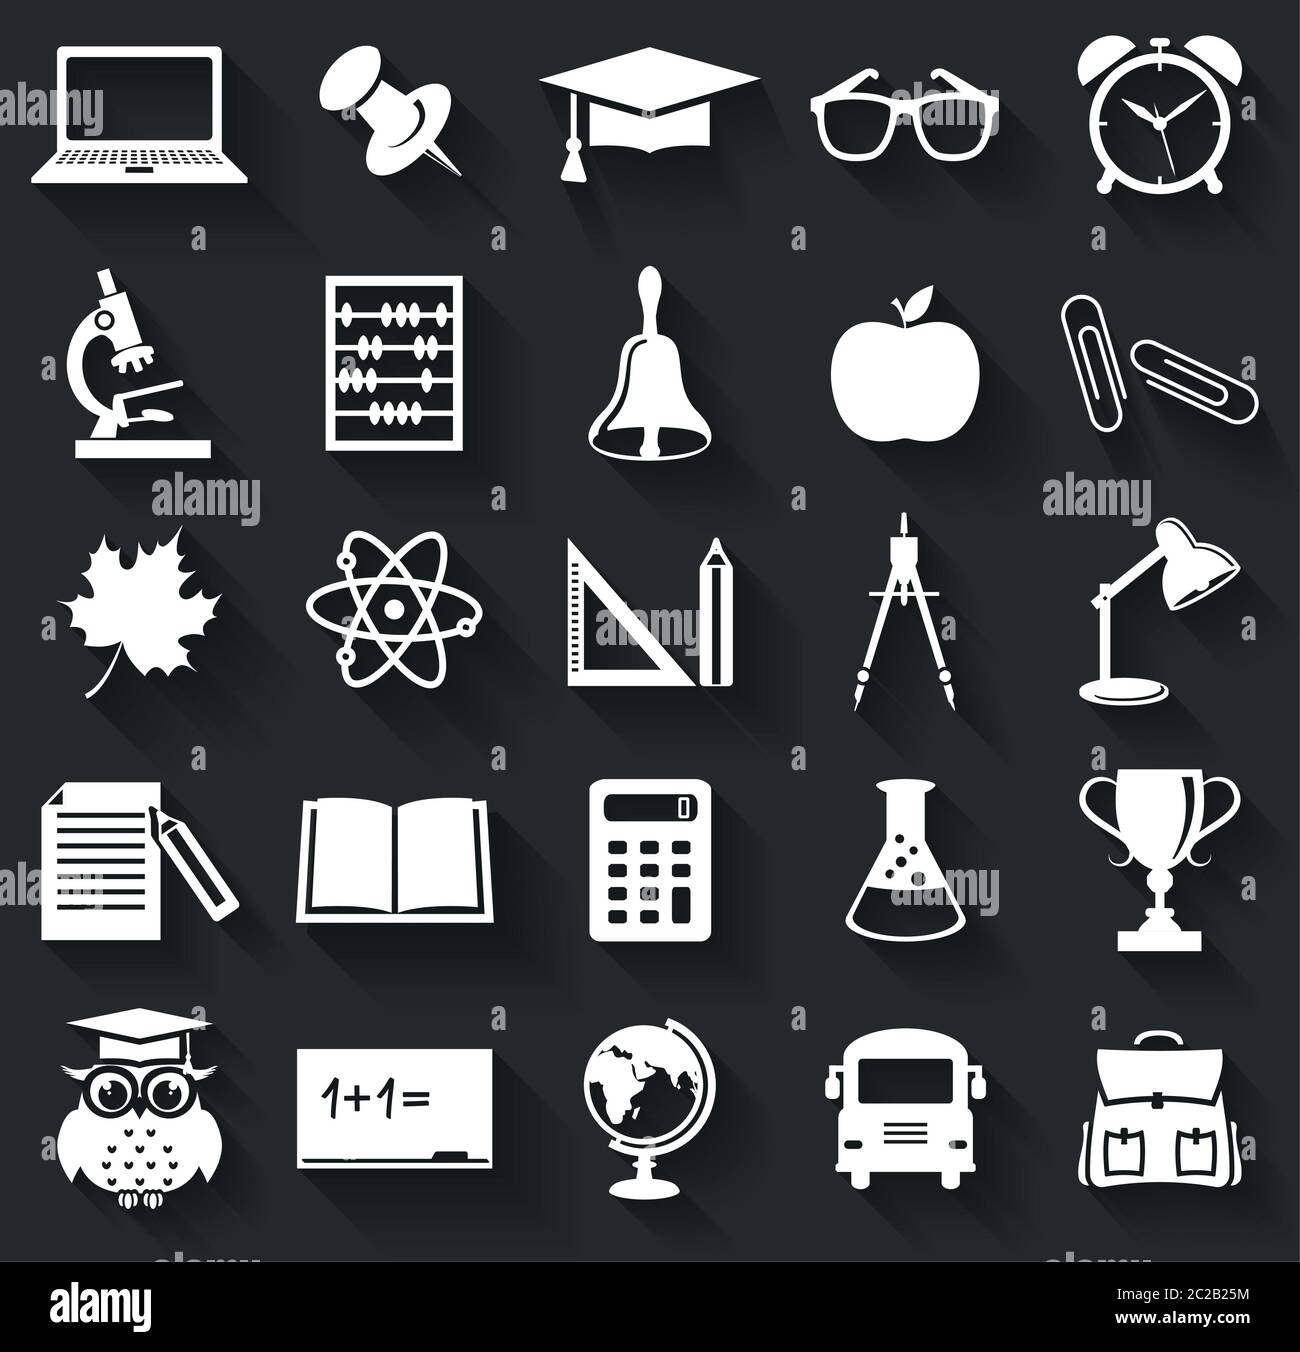 Back to school. Collection of school and education icons. Flat symbols with long shadows. Vector illustration. Stock Vector